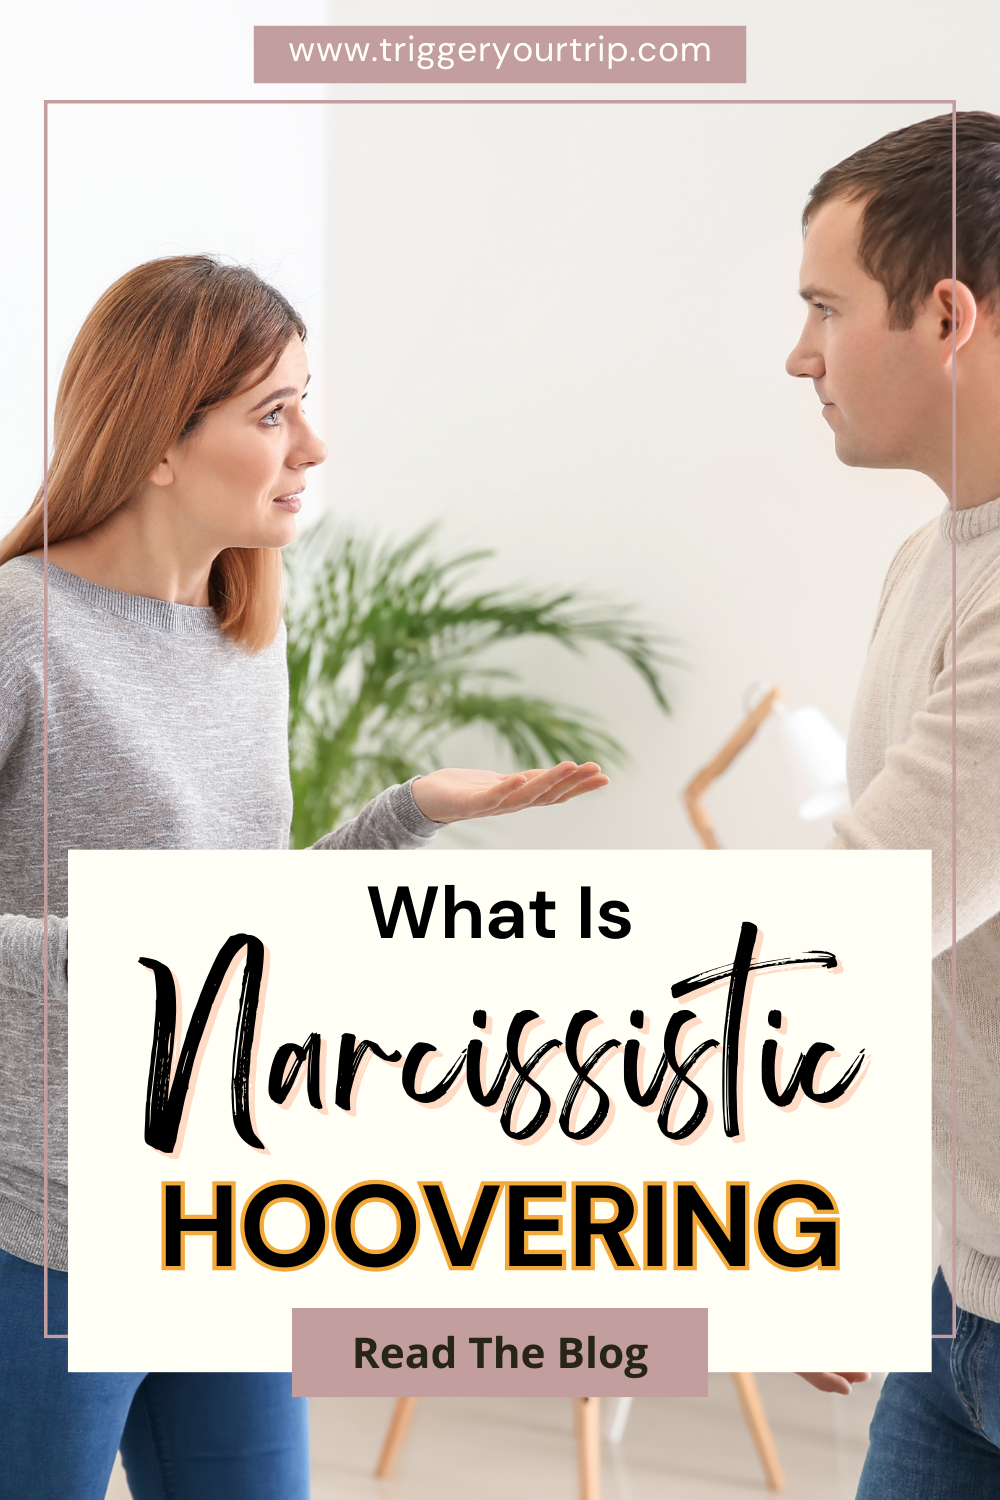 narcissist hoovering and narcissistic supply narcissists